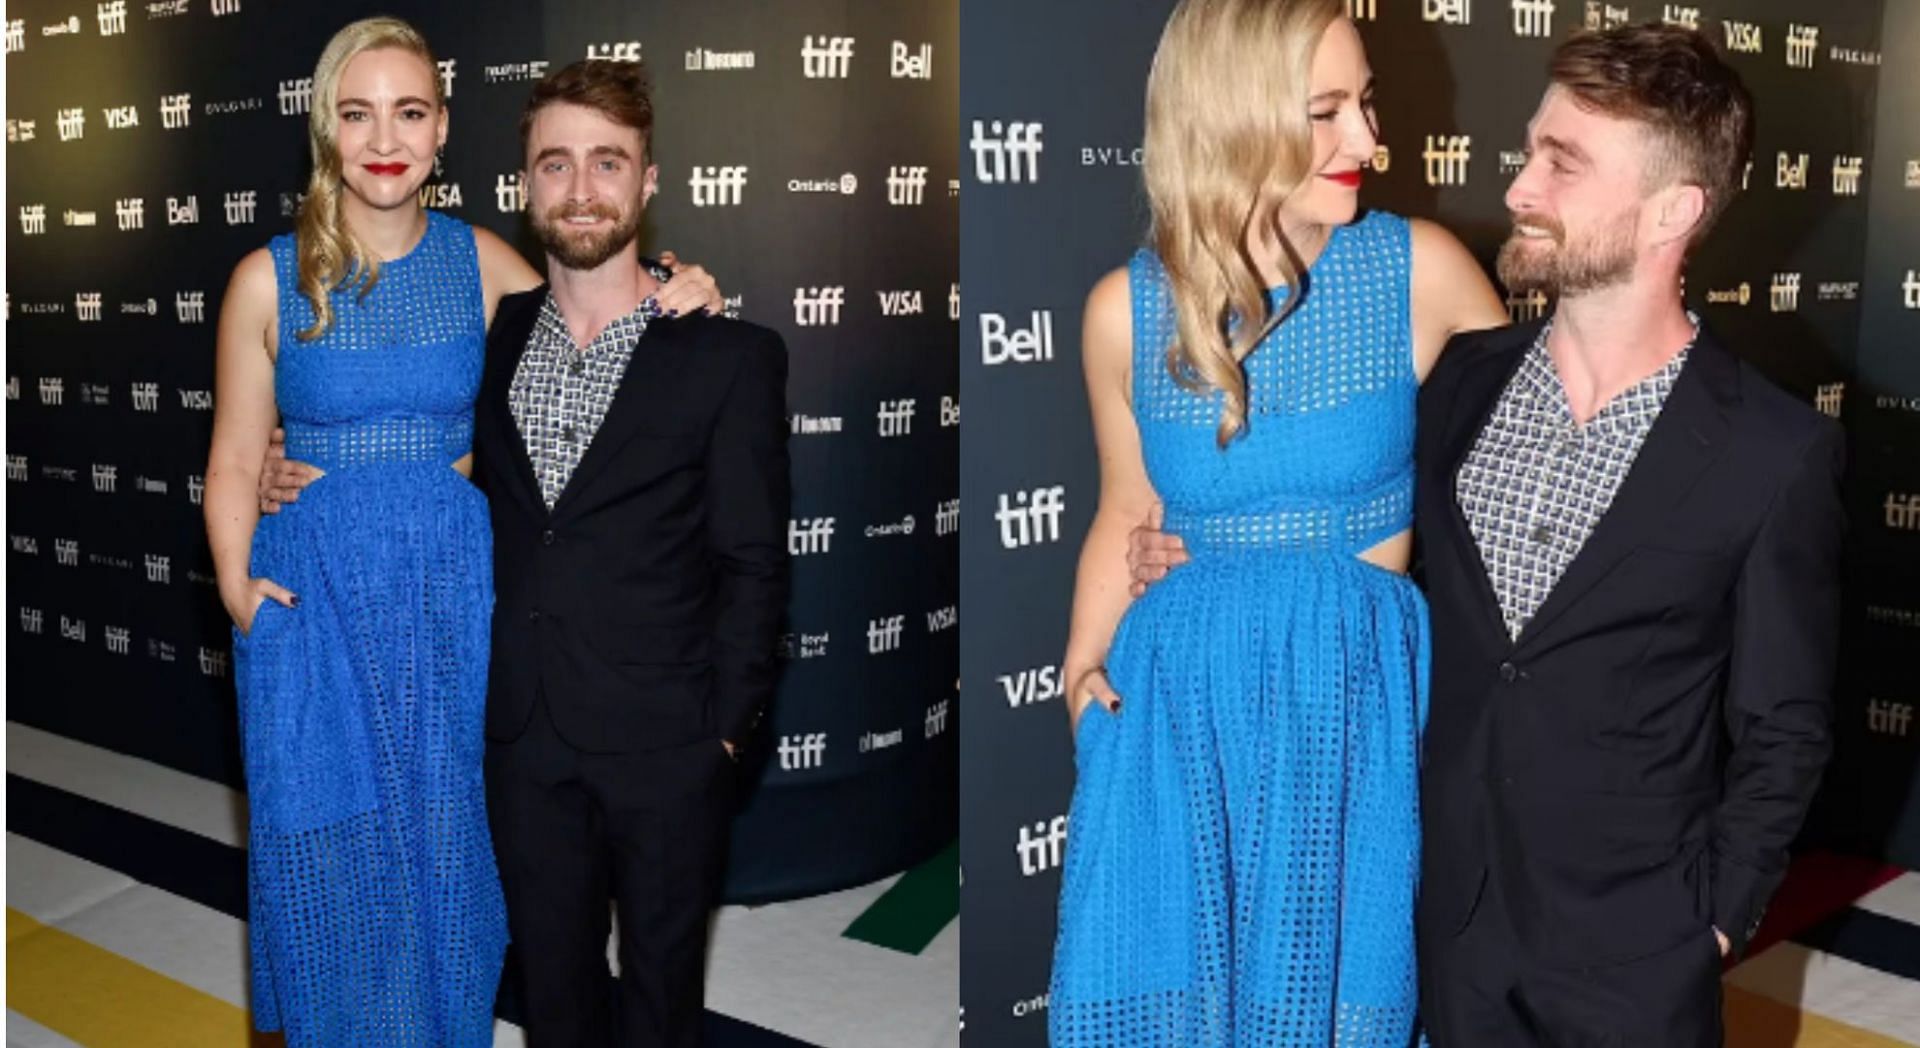 Daniel Radcliffe and Erin Darke recently made an appearance at the Toronto International Film Festival (Image via Araya Doheny/Getty Images)